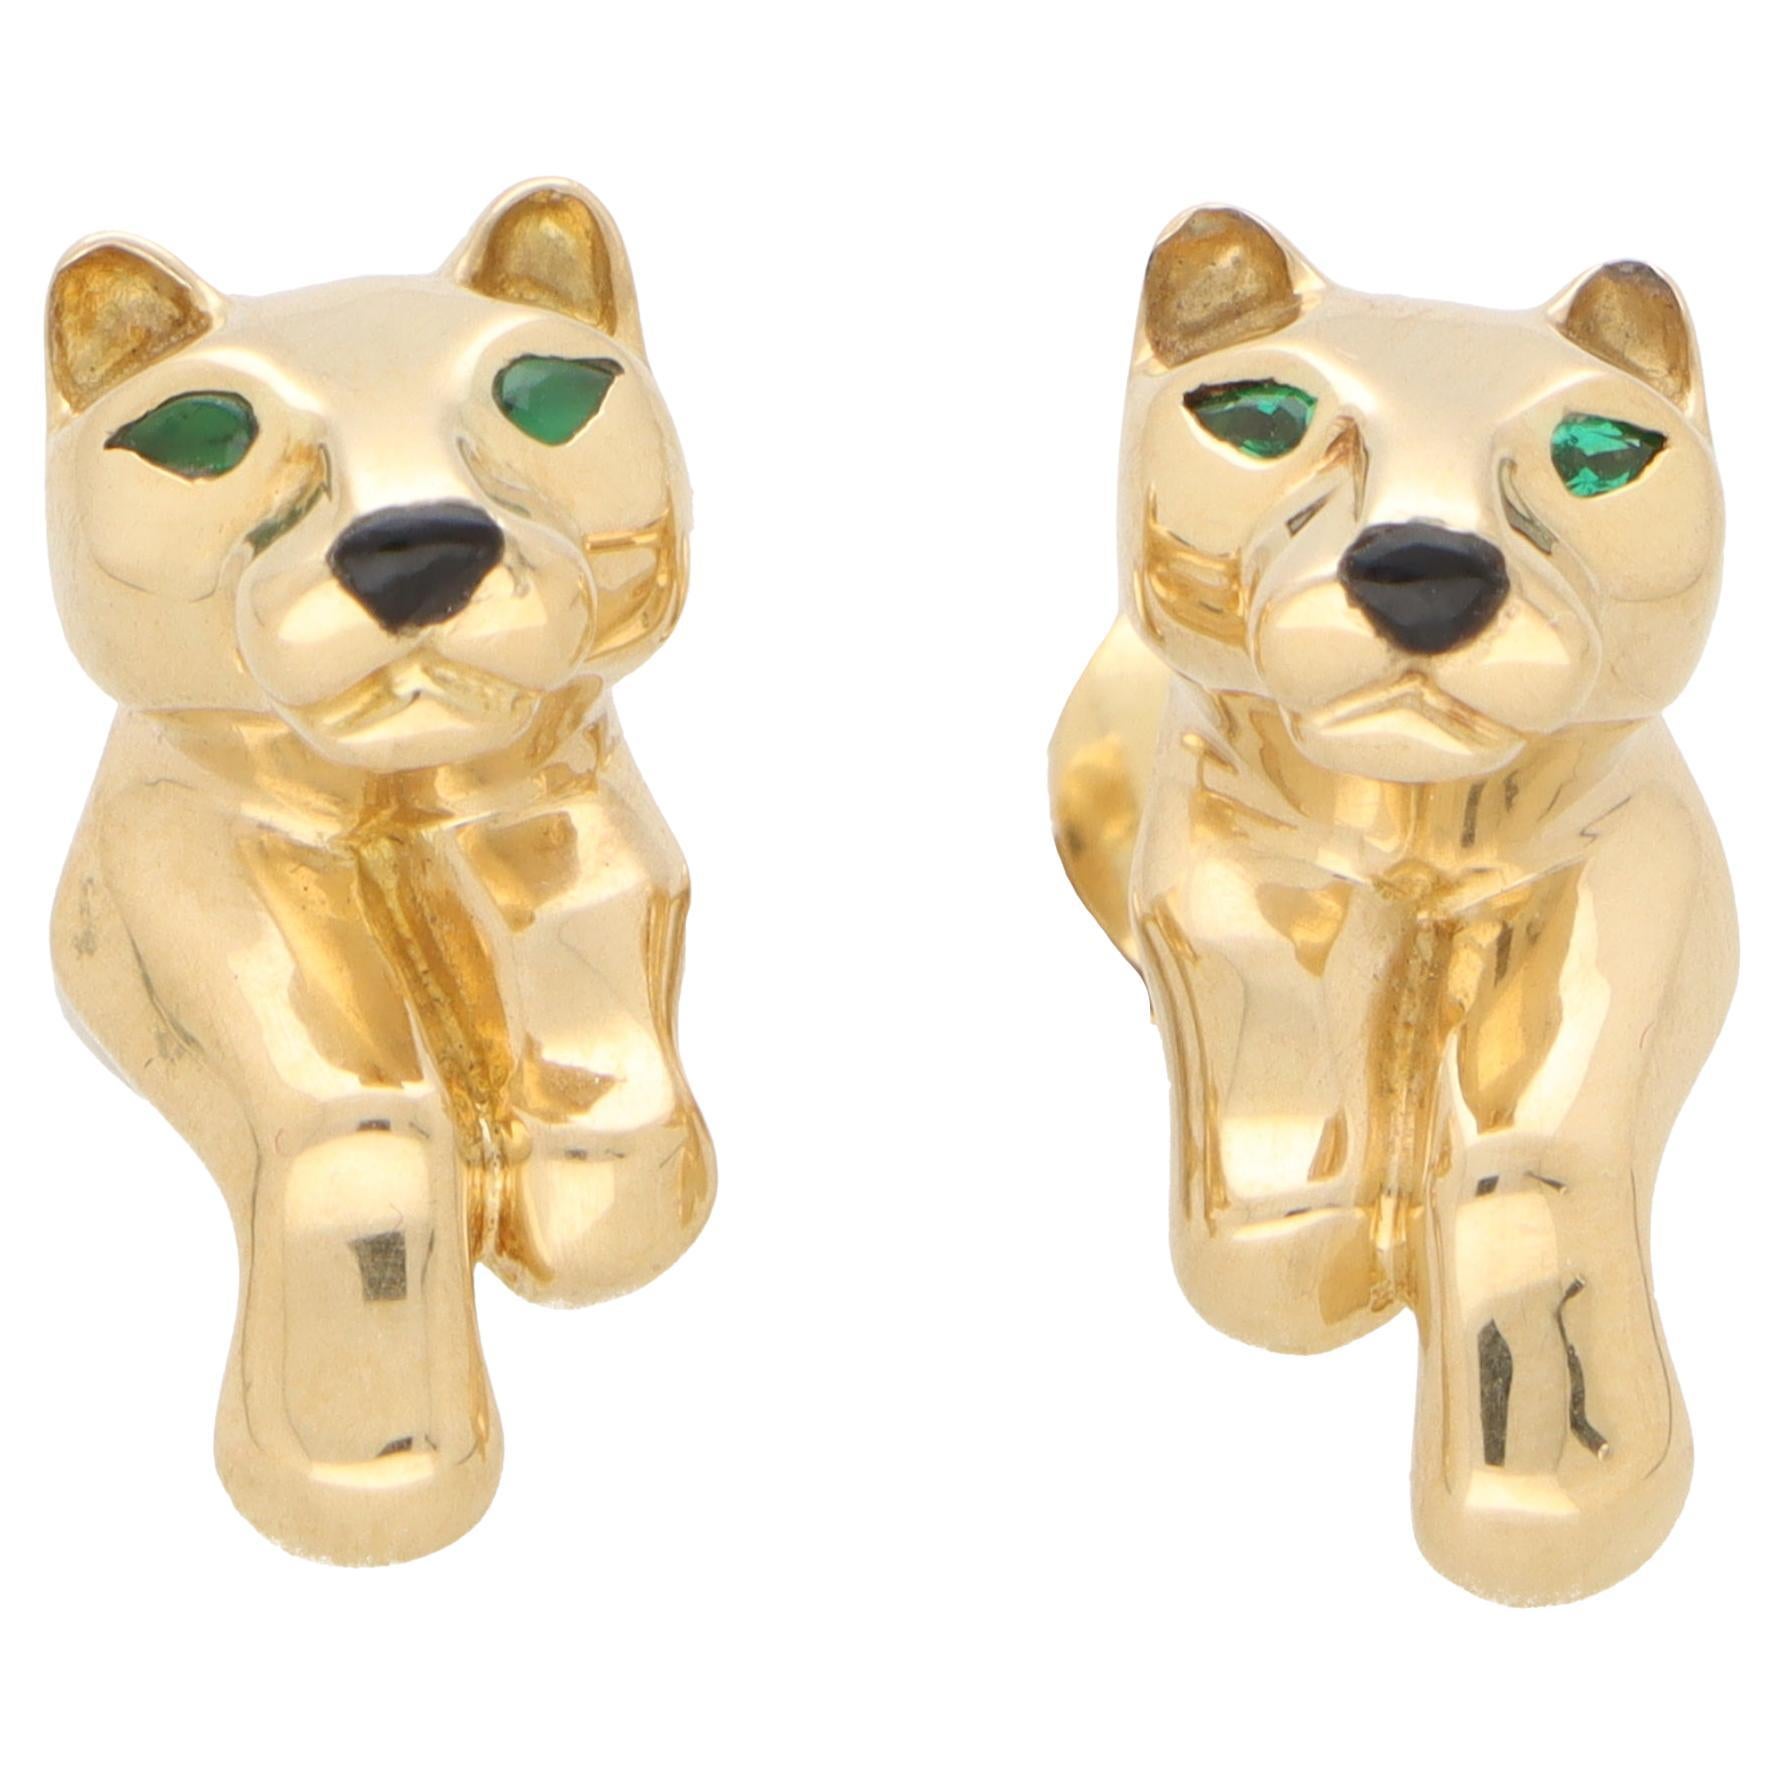 A beautiful pair of vintage Cartier panther earrings set in 18k yellow gold.

Each earring depicts the iconic Cartier motif, the panther, and are made of solid yellow gold. They are designed to perch on the wearers ear with the paws clutching the